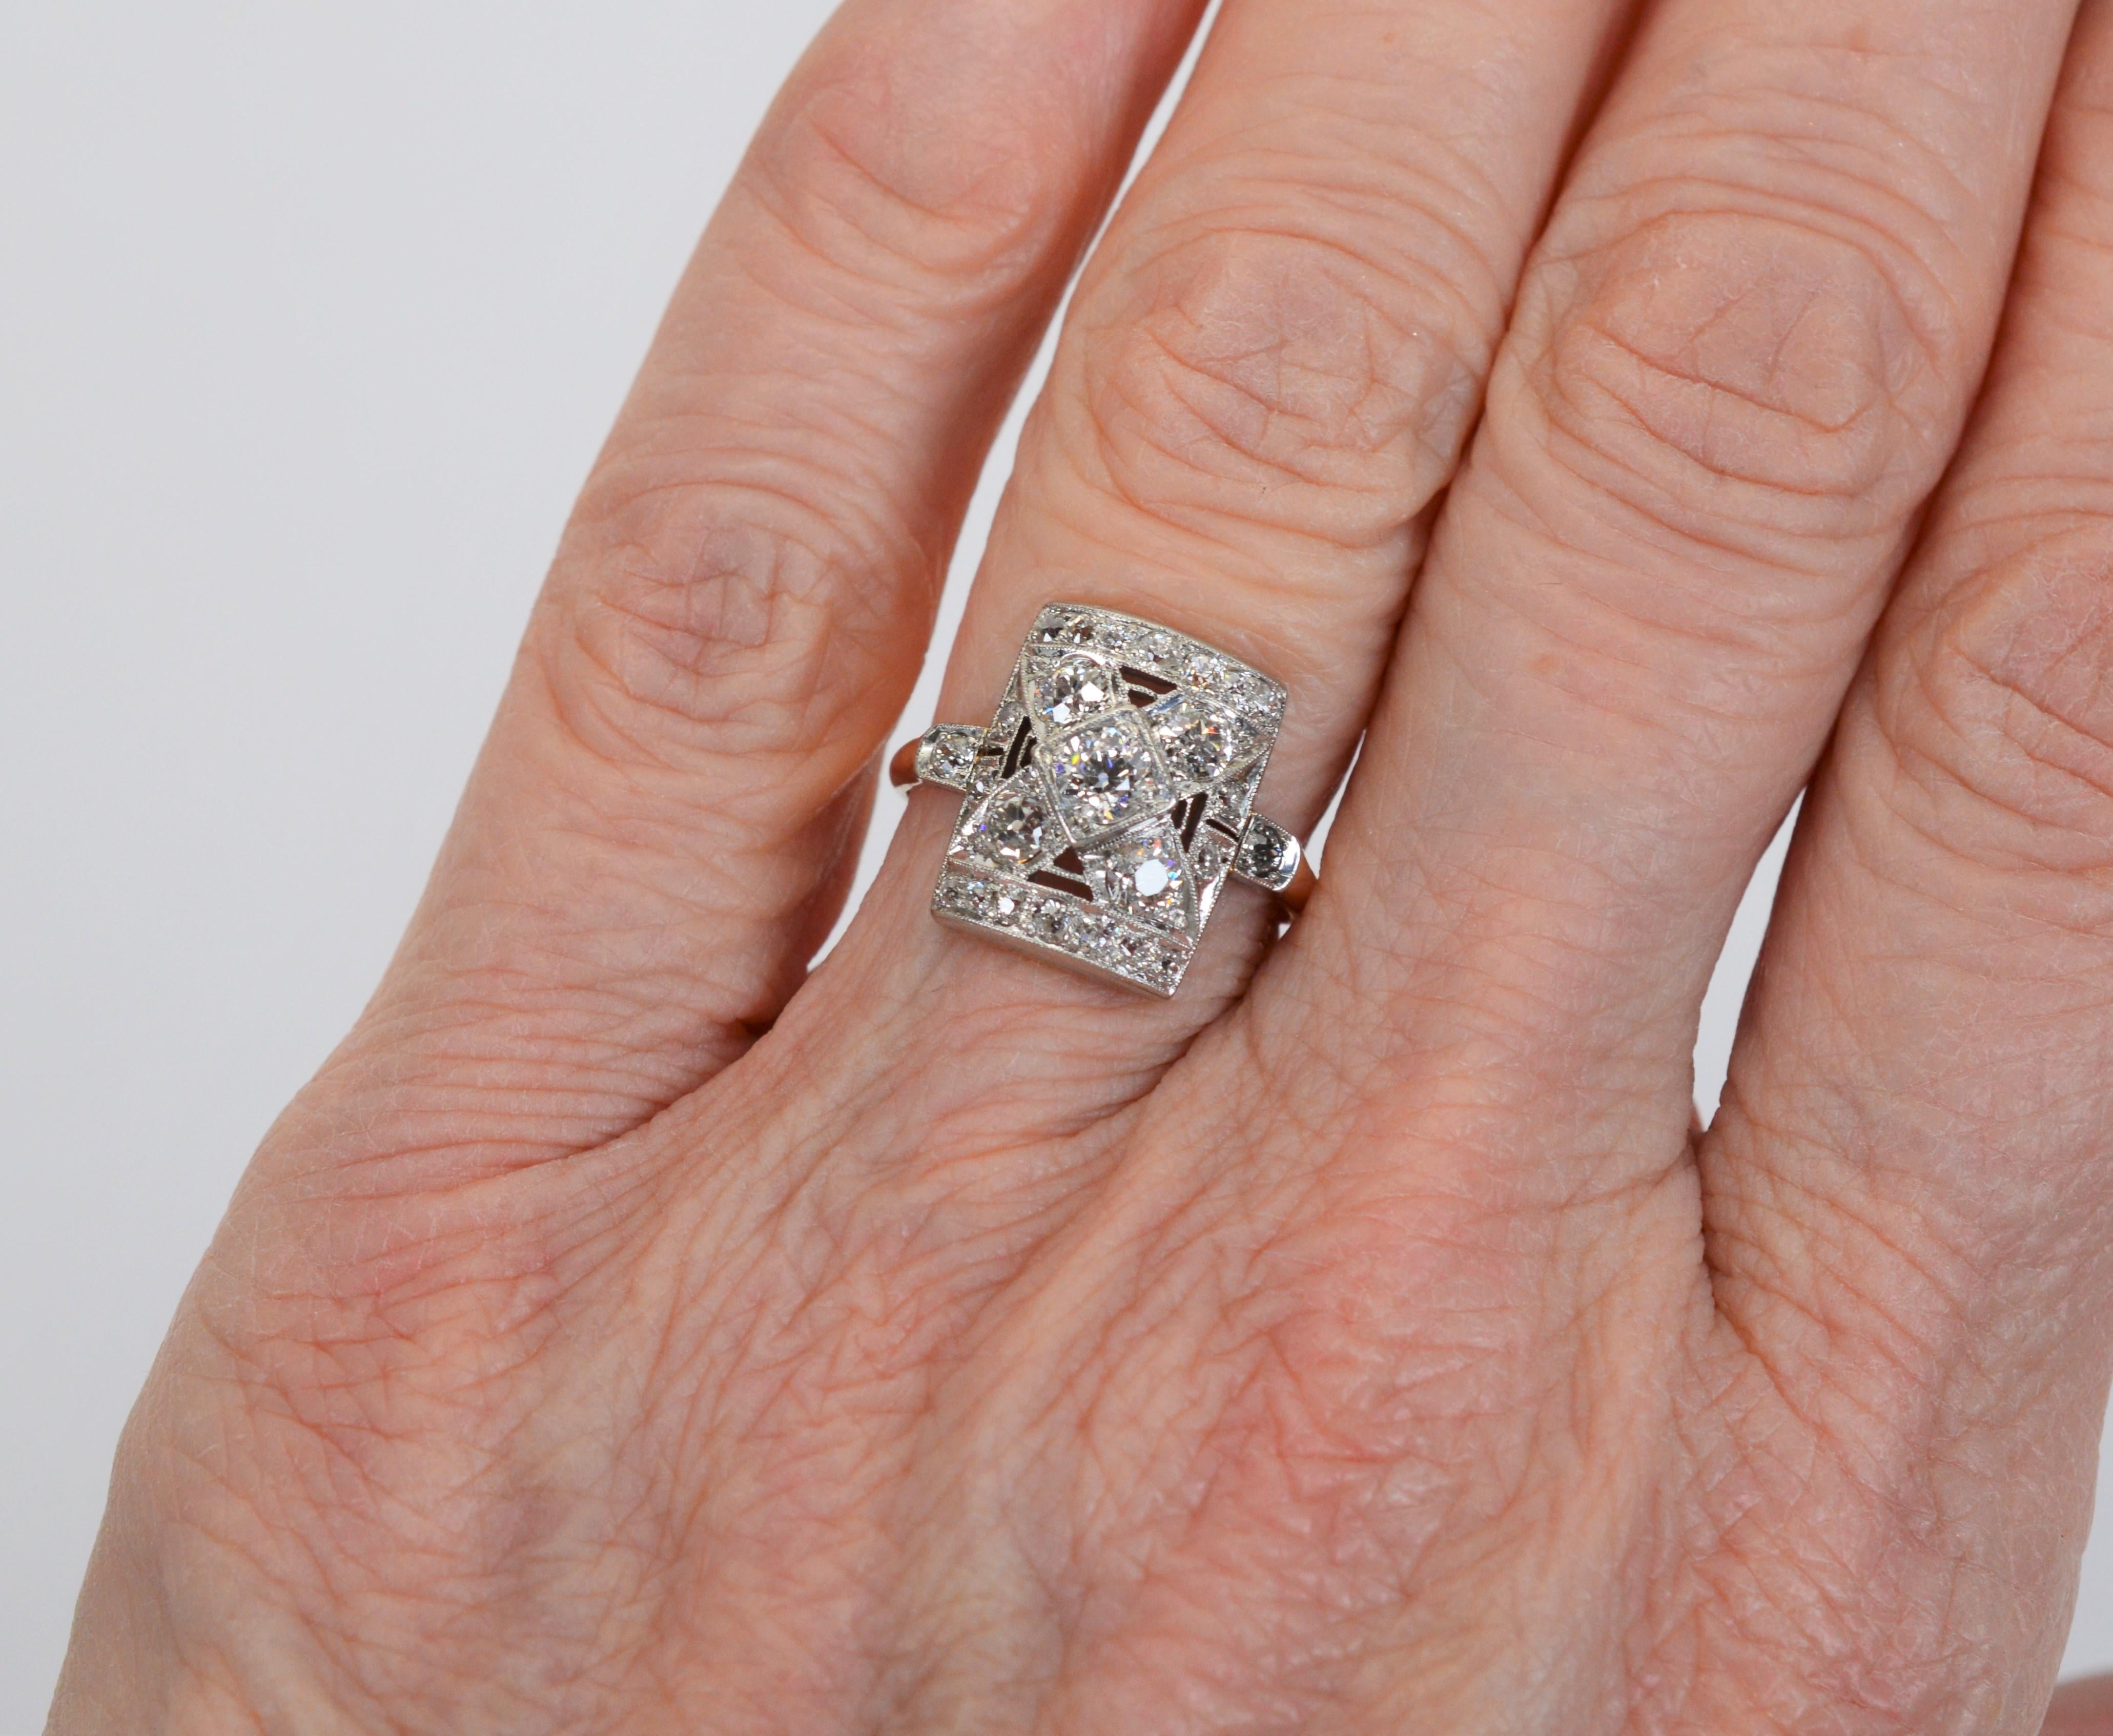 Antique Diamond Platinum Ten Karat Yellow Gold Ring In Good Condition For Sale In Mount Kisco, NY